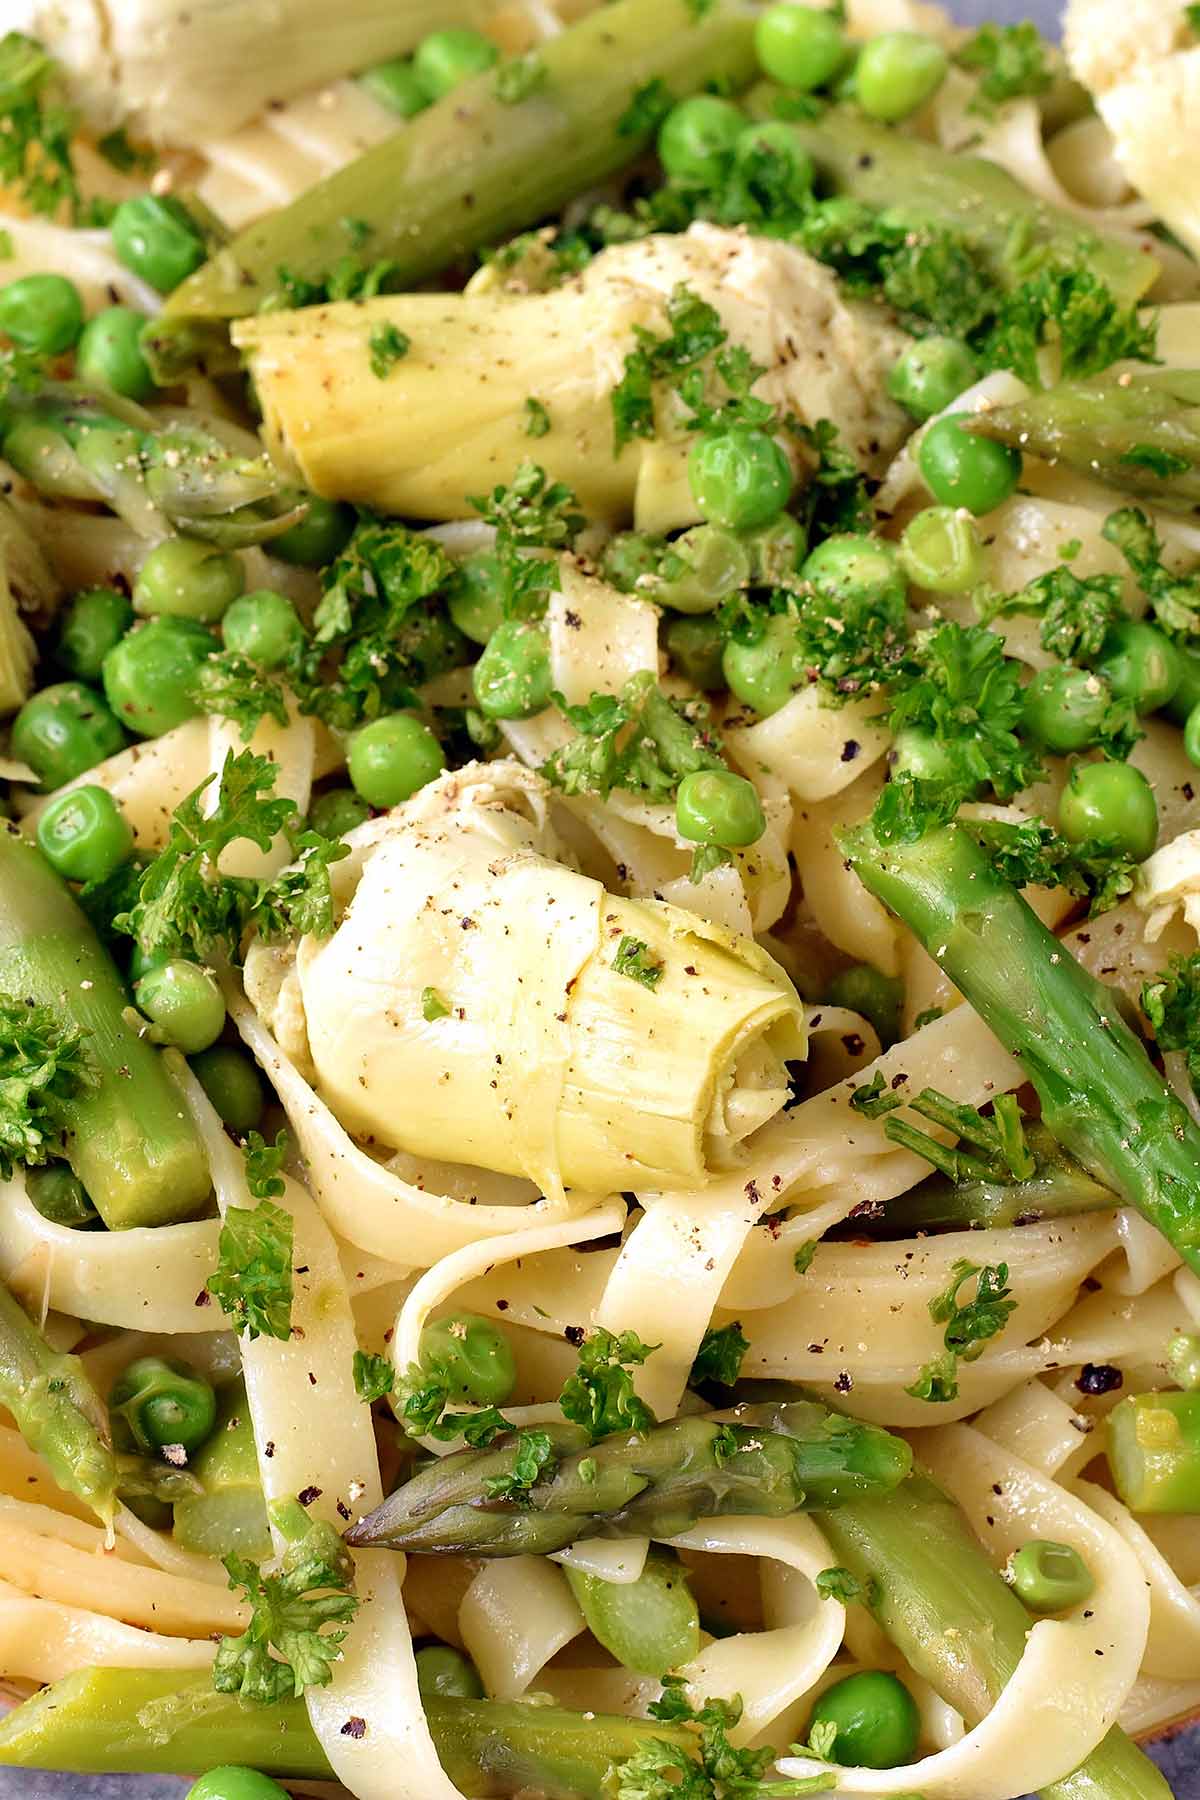 Artichokes, peas and asparagus mixed in with pasta and topped with herbs.